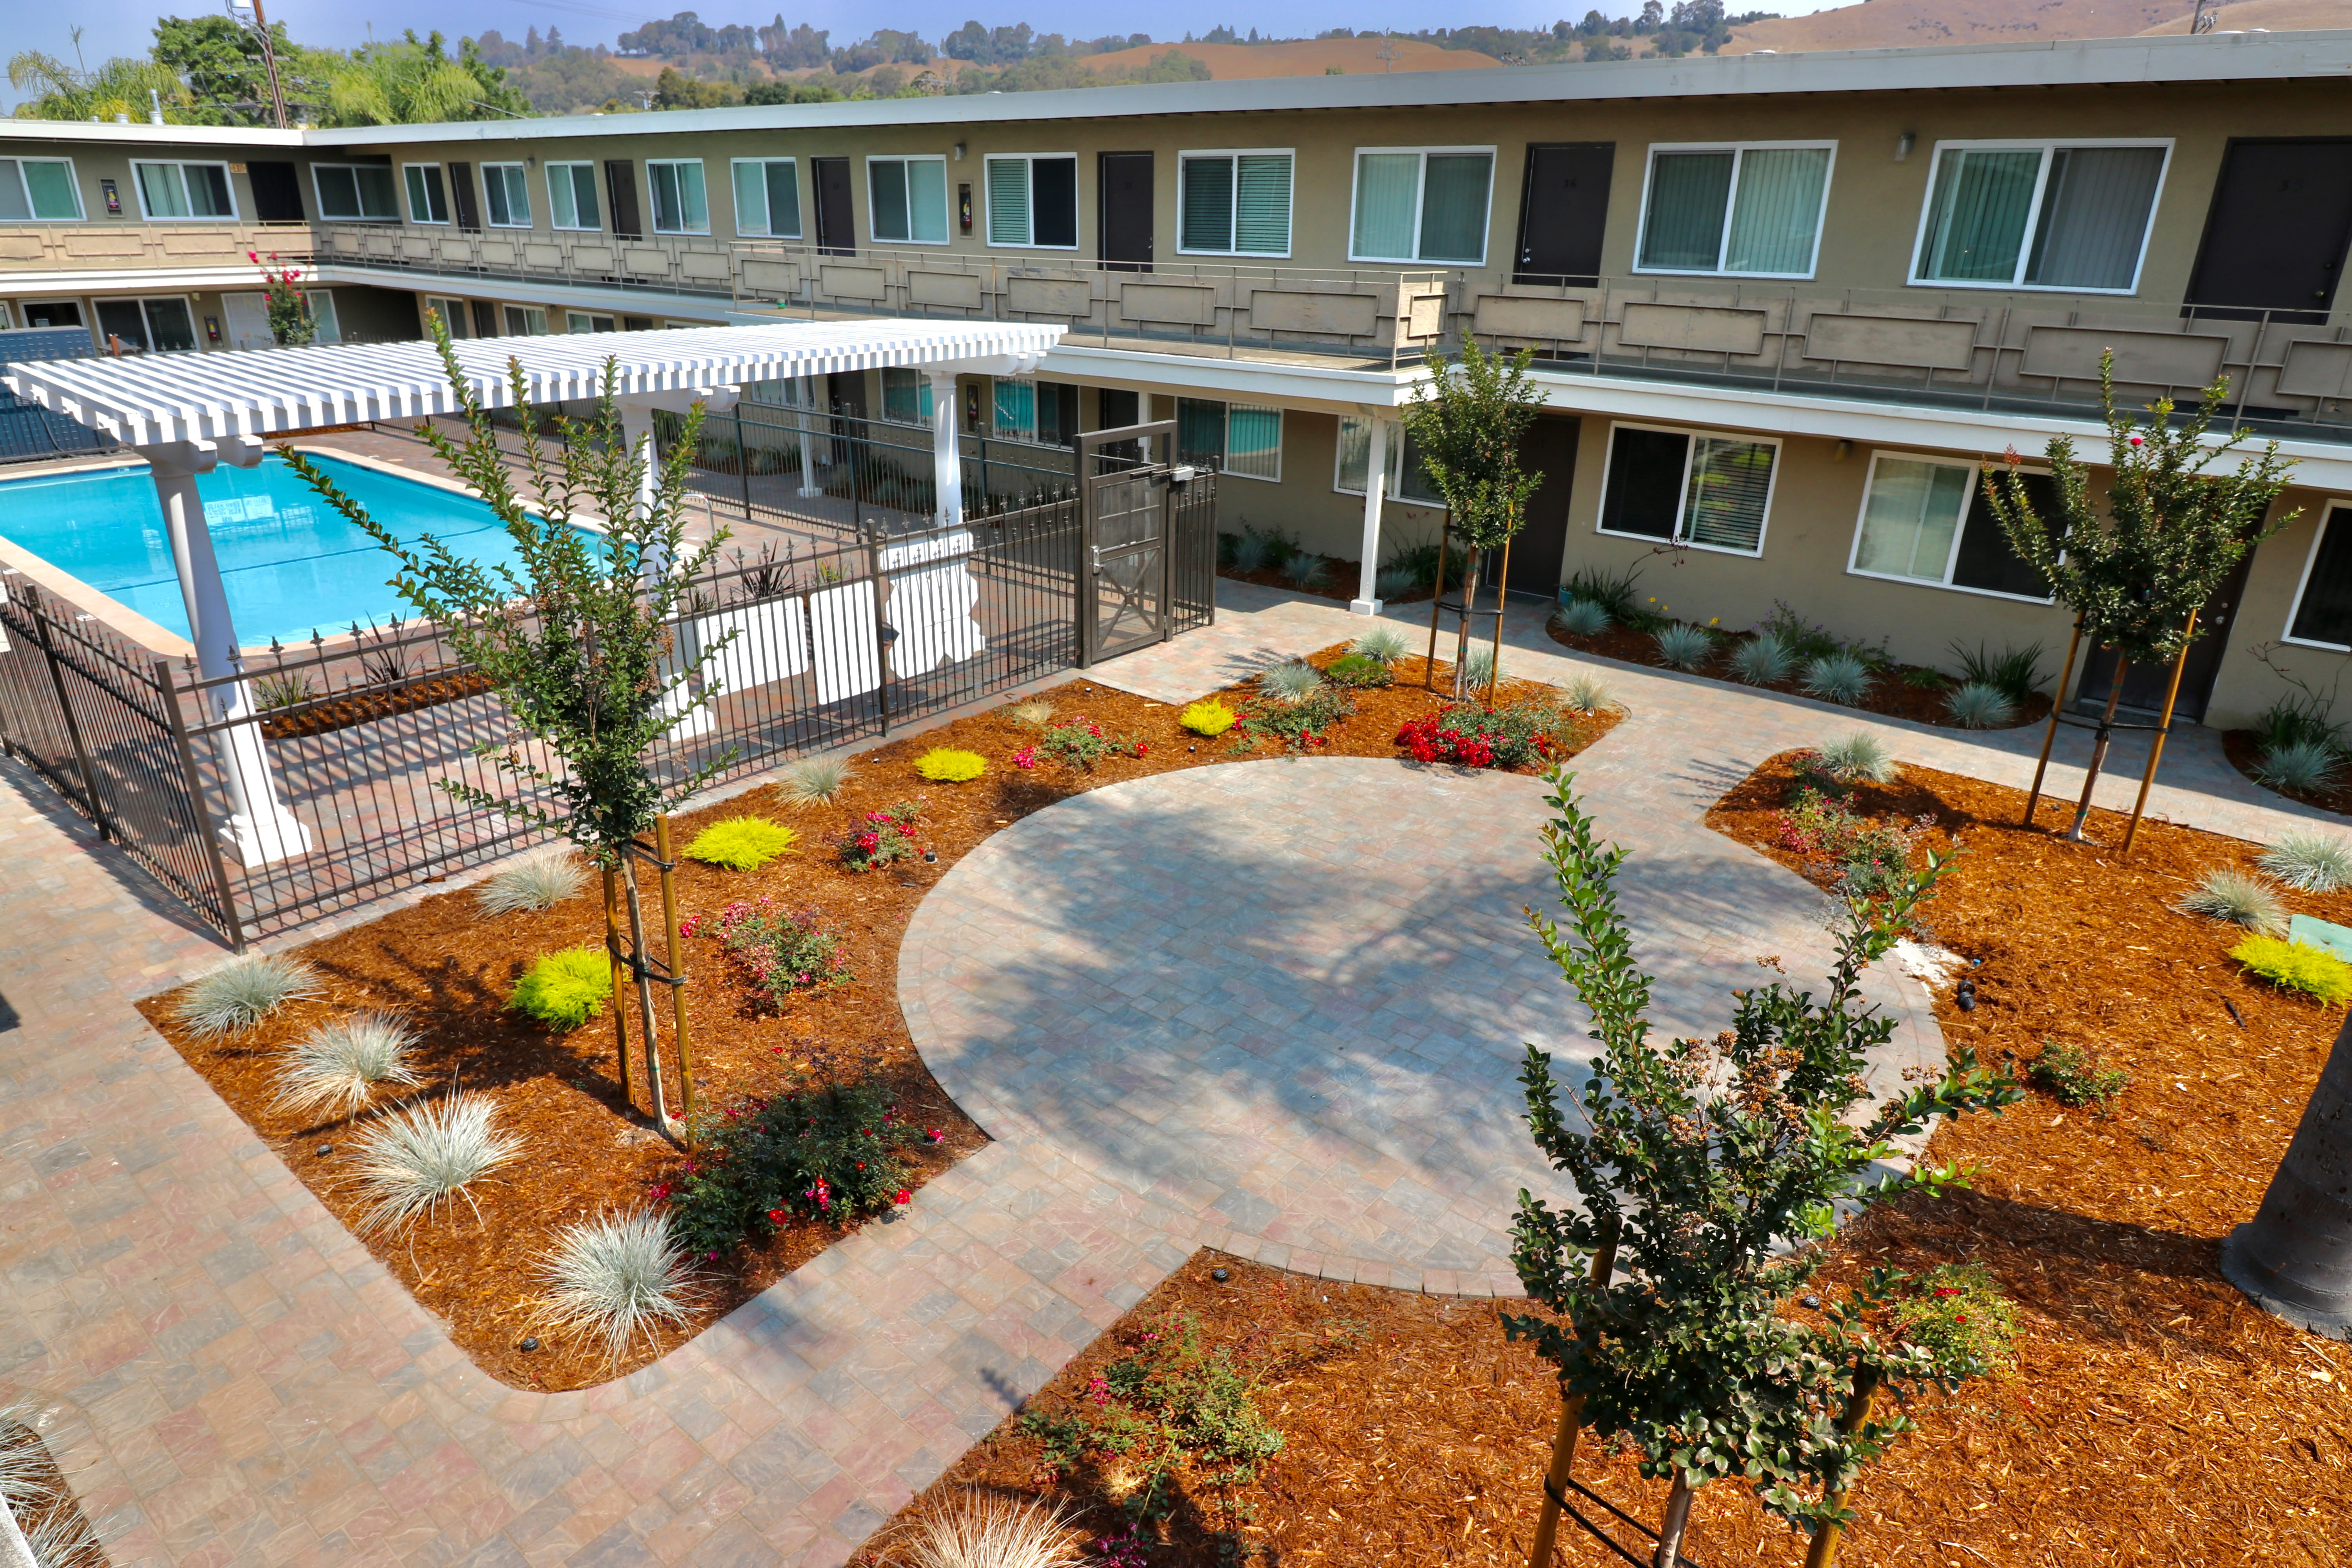 Pool area in the middle of apartment complex at Coral Gardens Apartments in Hayward, California